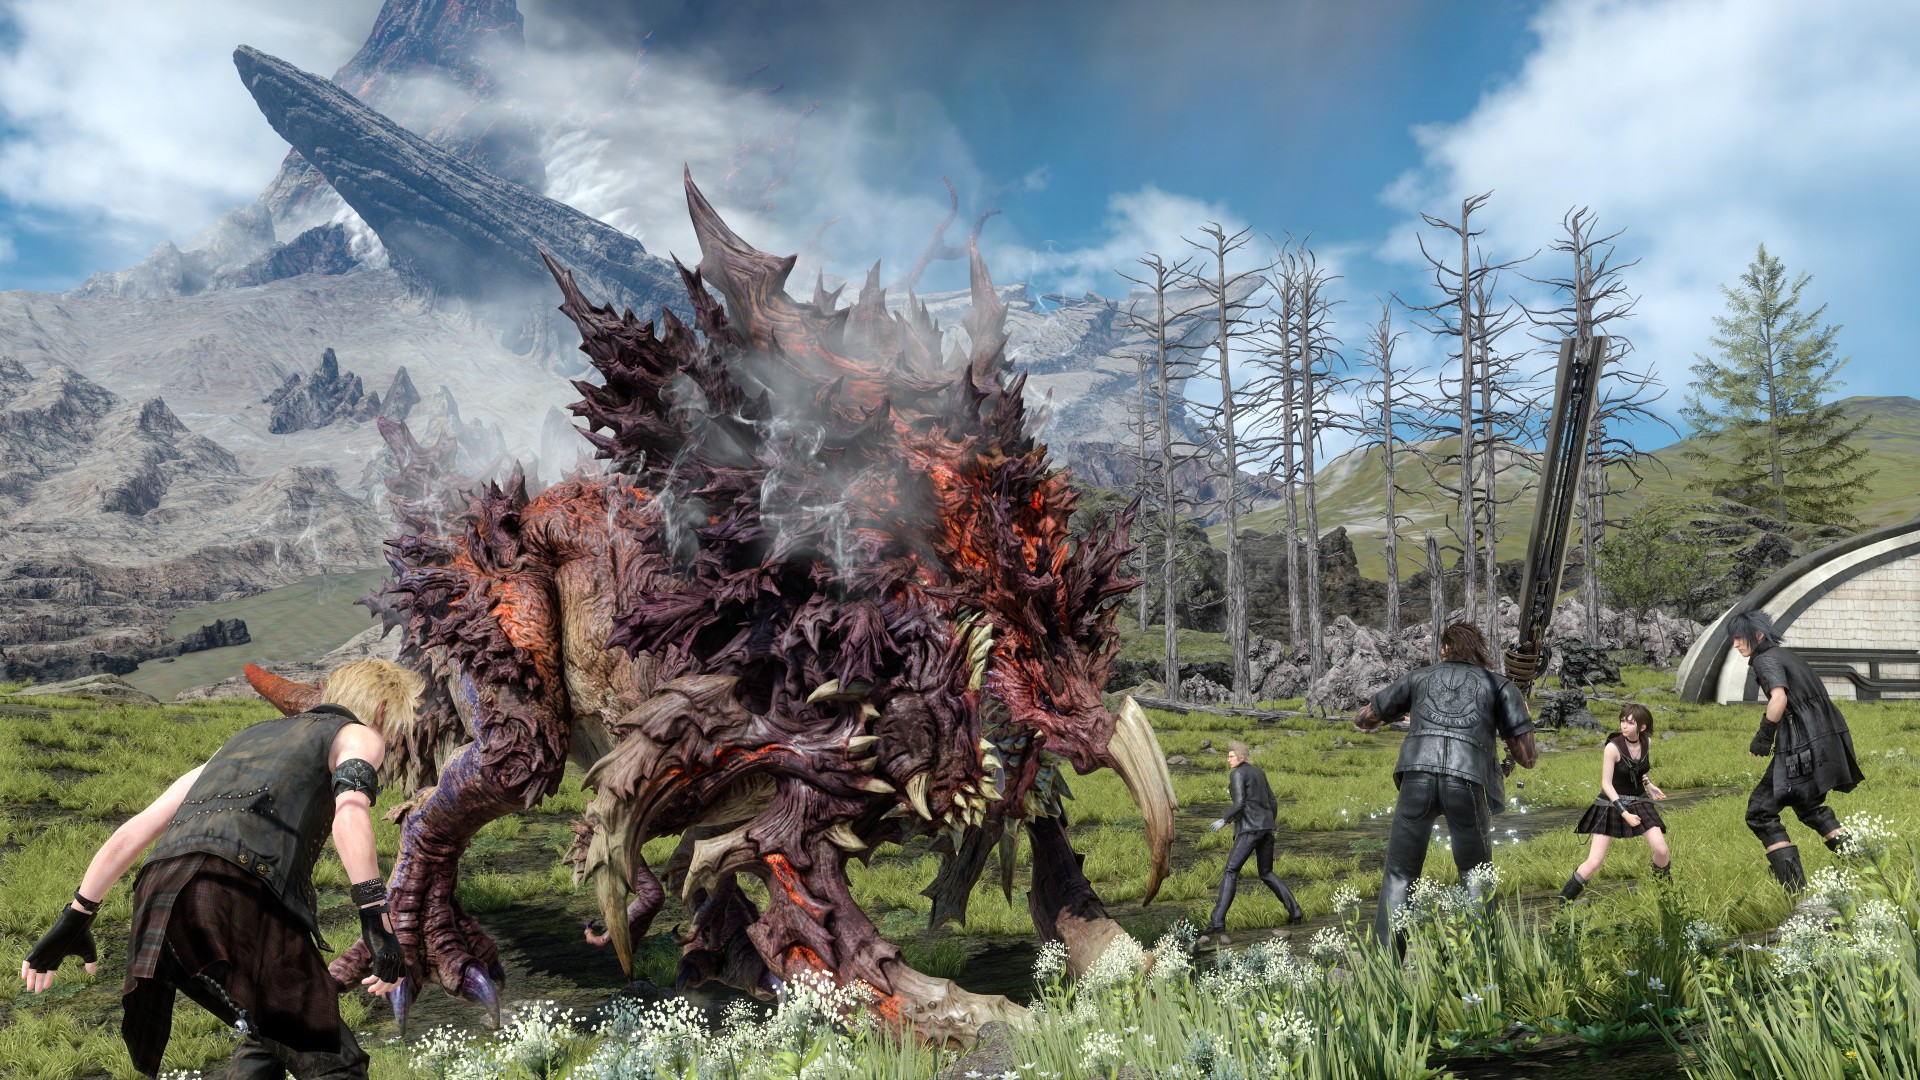 Media asset in full size related to 3dfxzone.it news item entitled as follows: Square Enix e NVIDIA annunciano il game Final Fantasy XV Windows Edition | Image Name: news26892_Final-Fantasy-XV-Windows-Edition-Screenshot_5.jpg